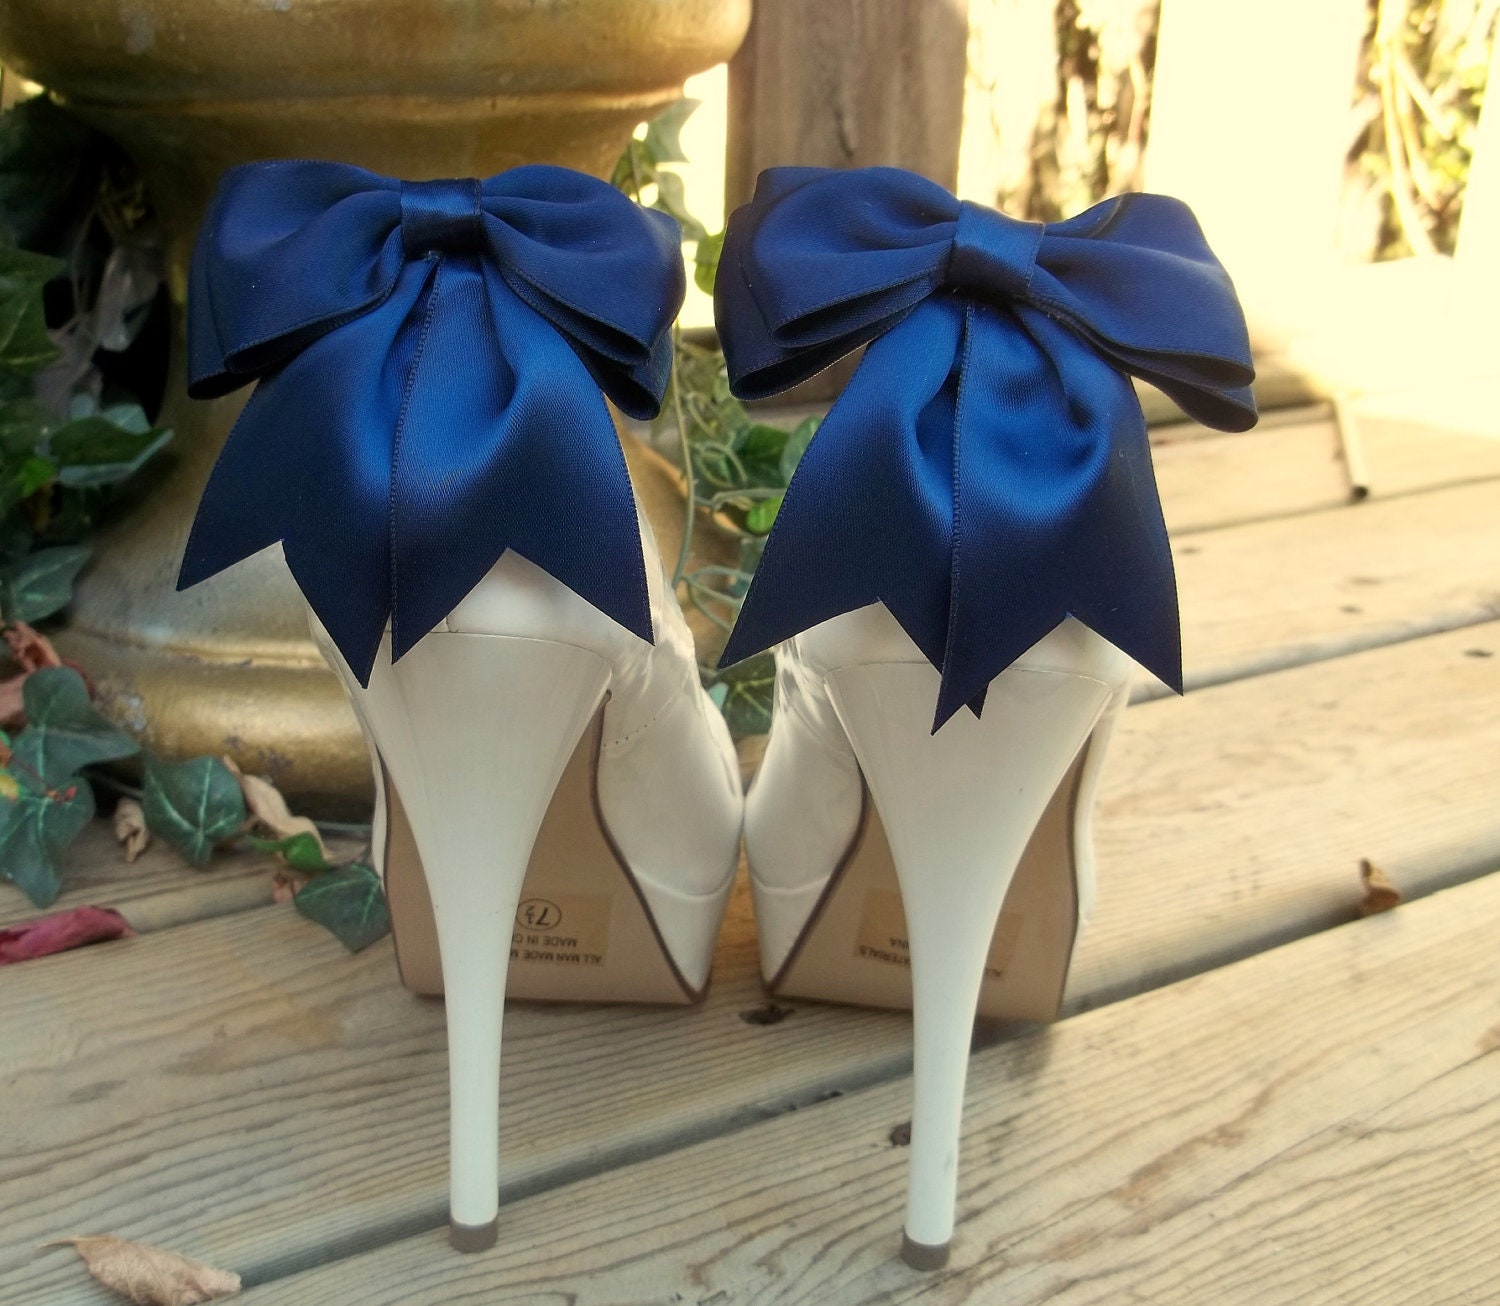 Satin Bow Shoe Clips - set of 2 -  Bridal Shoe Clips, Wedding shoe clips many colors to choose from - ShoeClipsOnly